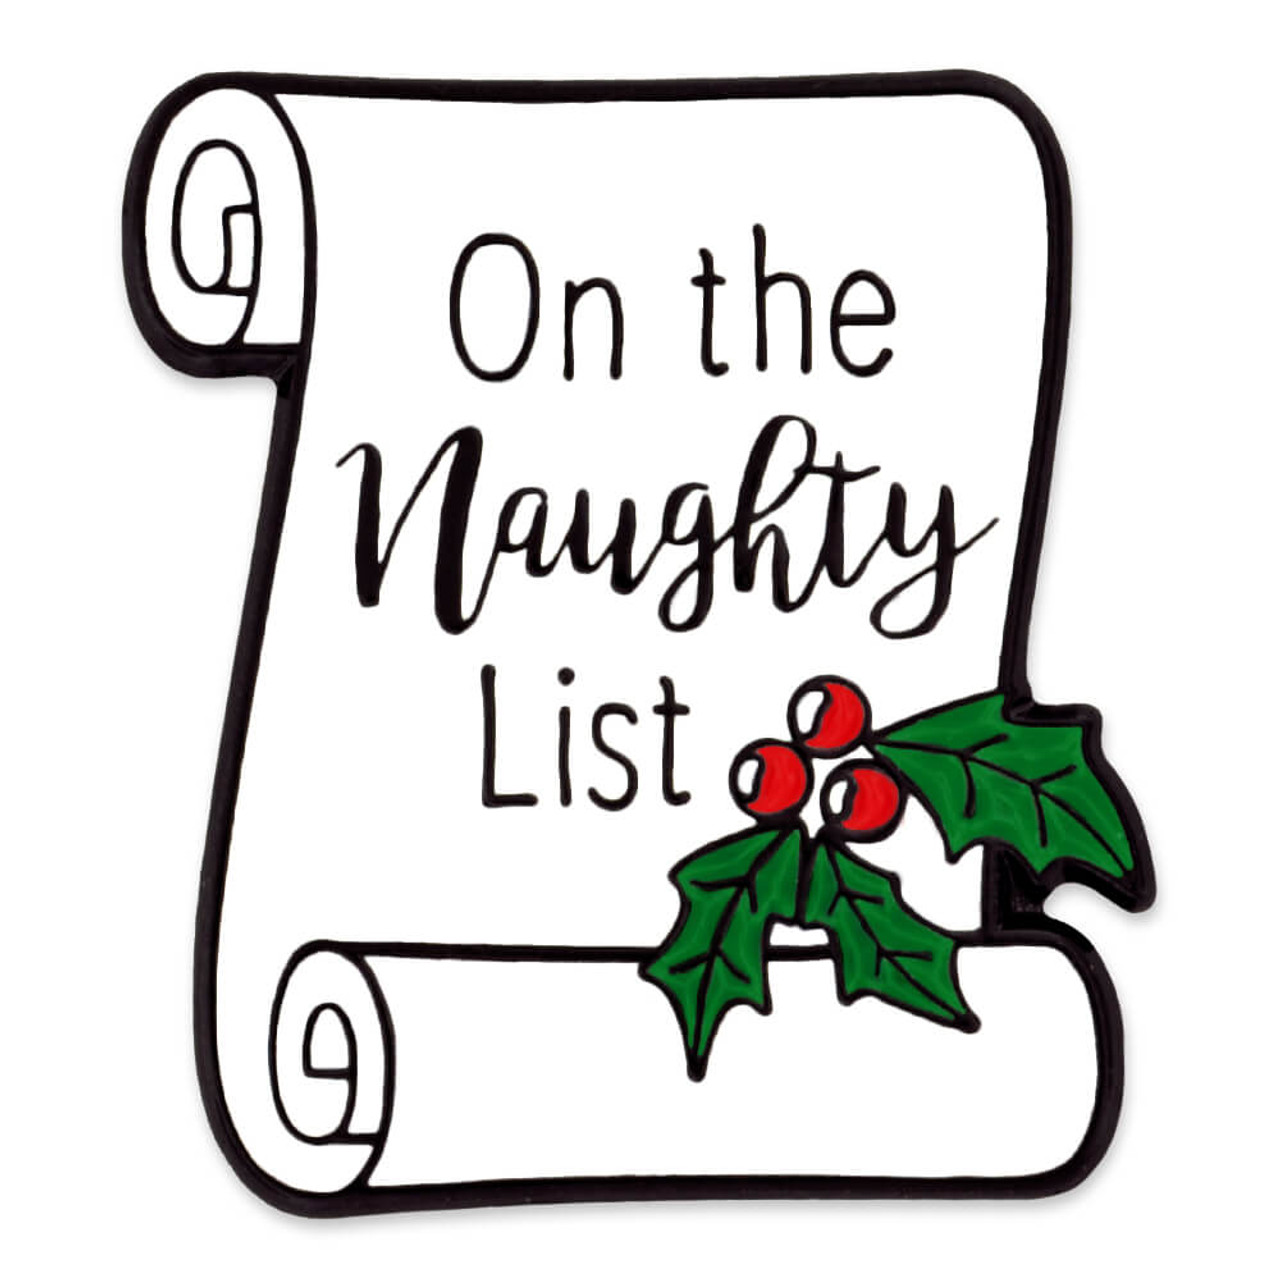 Naughty List Pin | Multi Color | Christmas Pins by PinMart